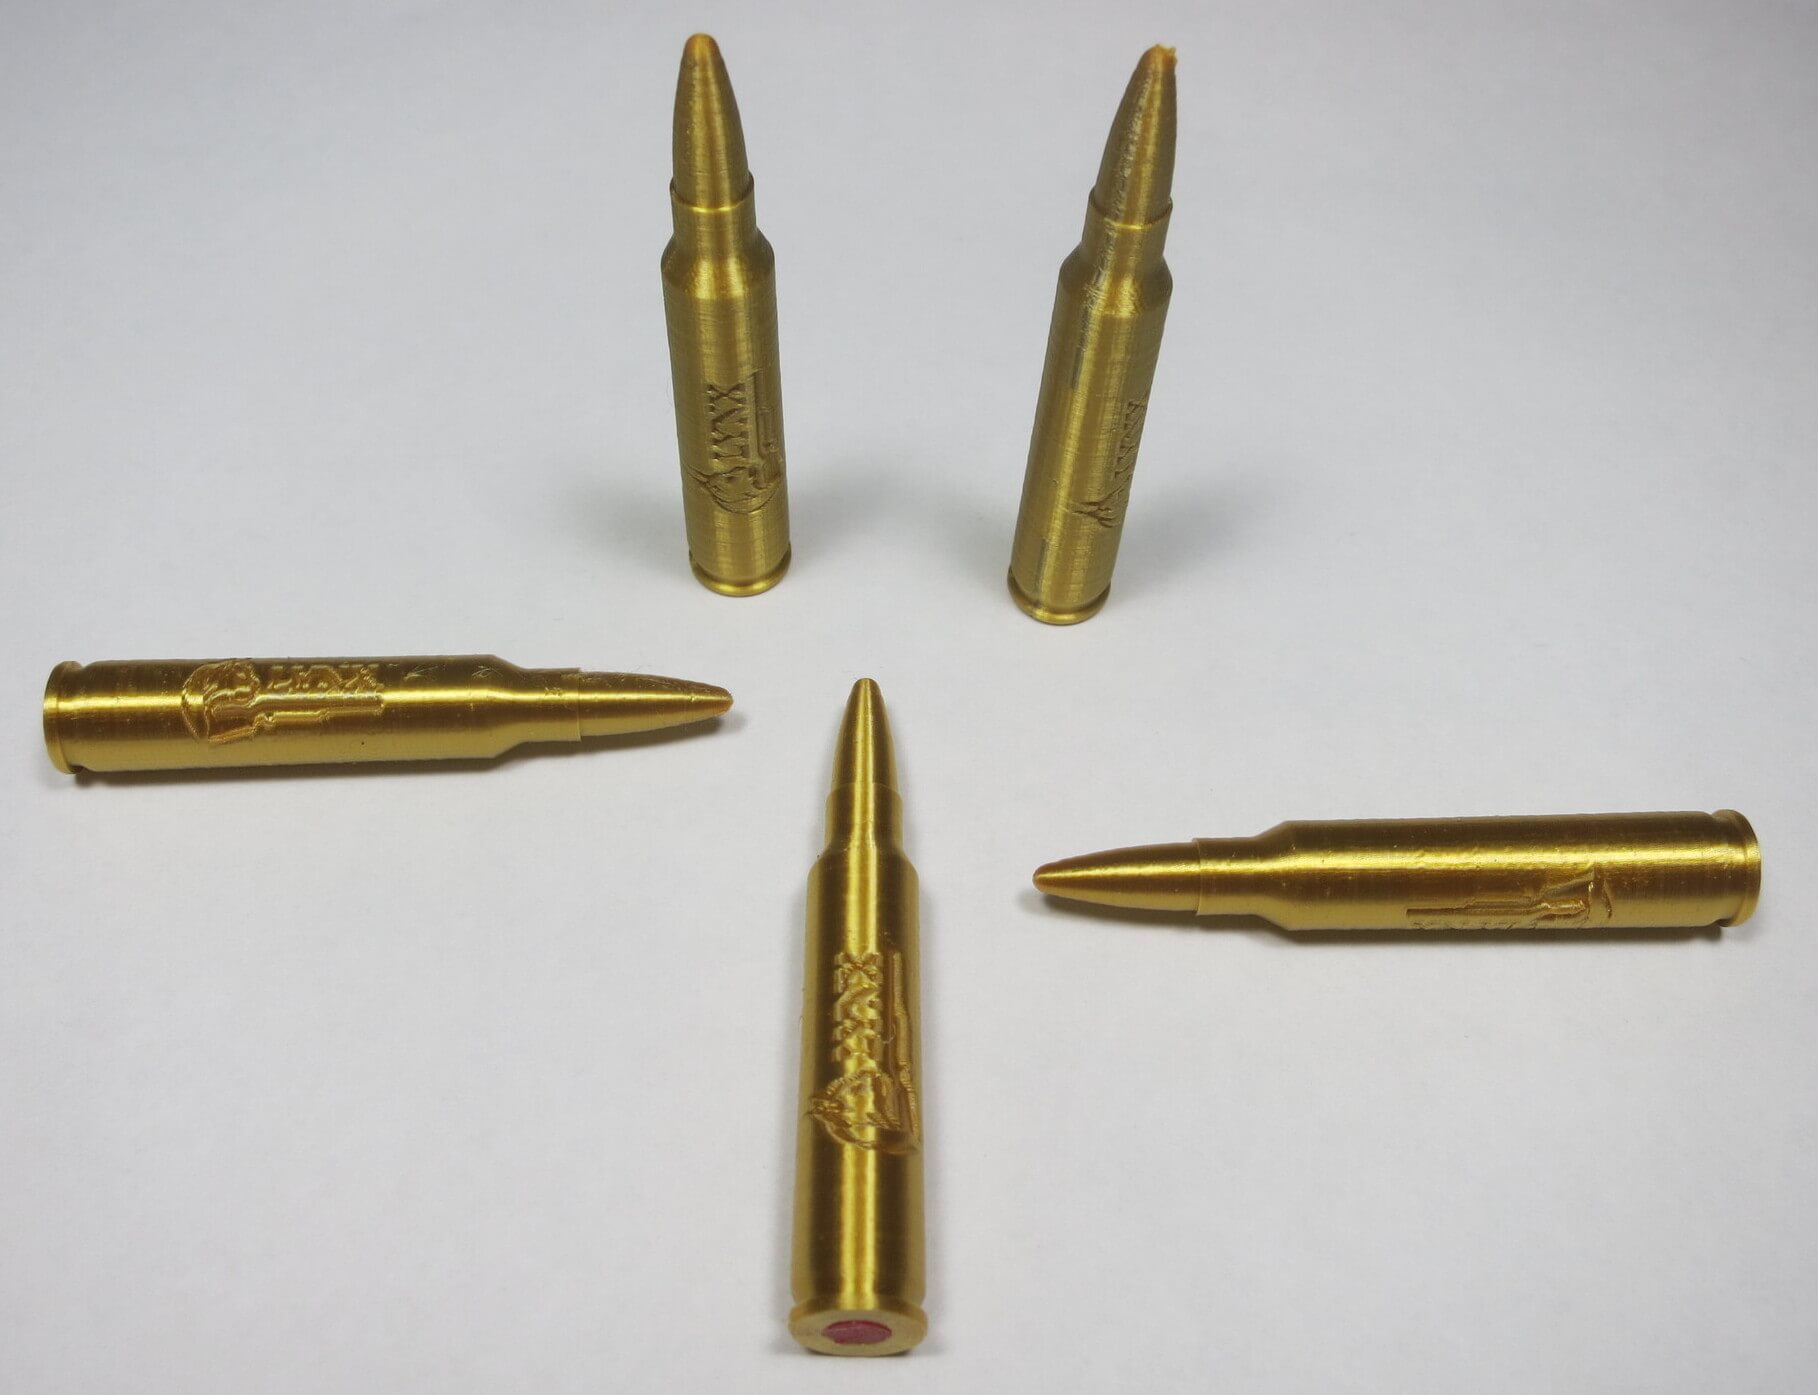 6-223 REMINGTON RUBBER FILLED PRACTICE ROUNDS/ Dummy Rounds/ Snap Caps. 